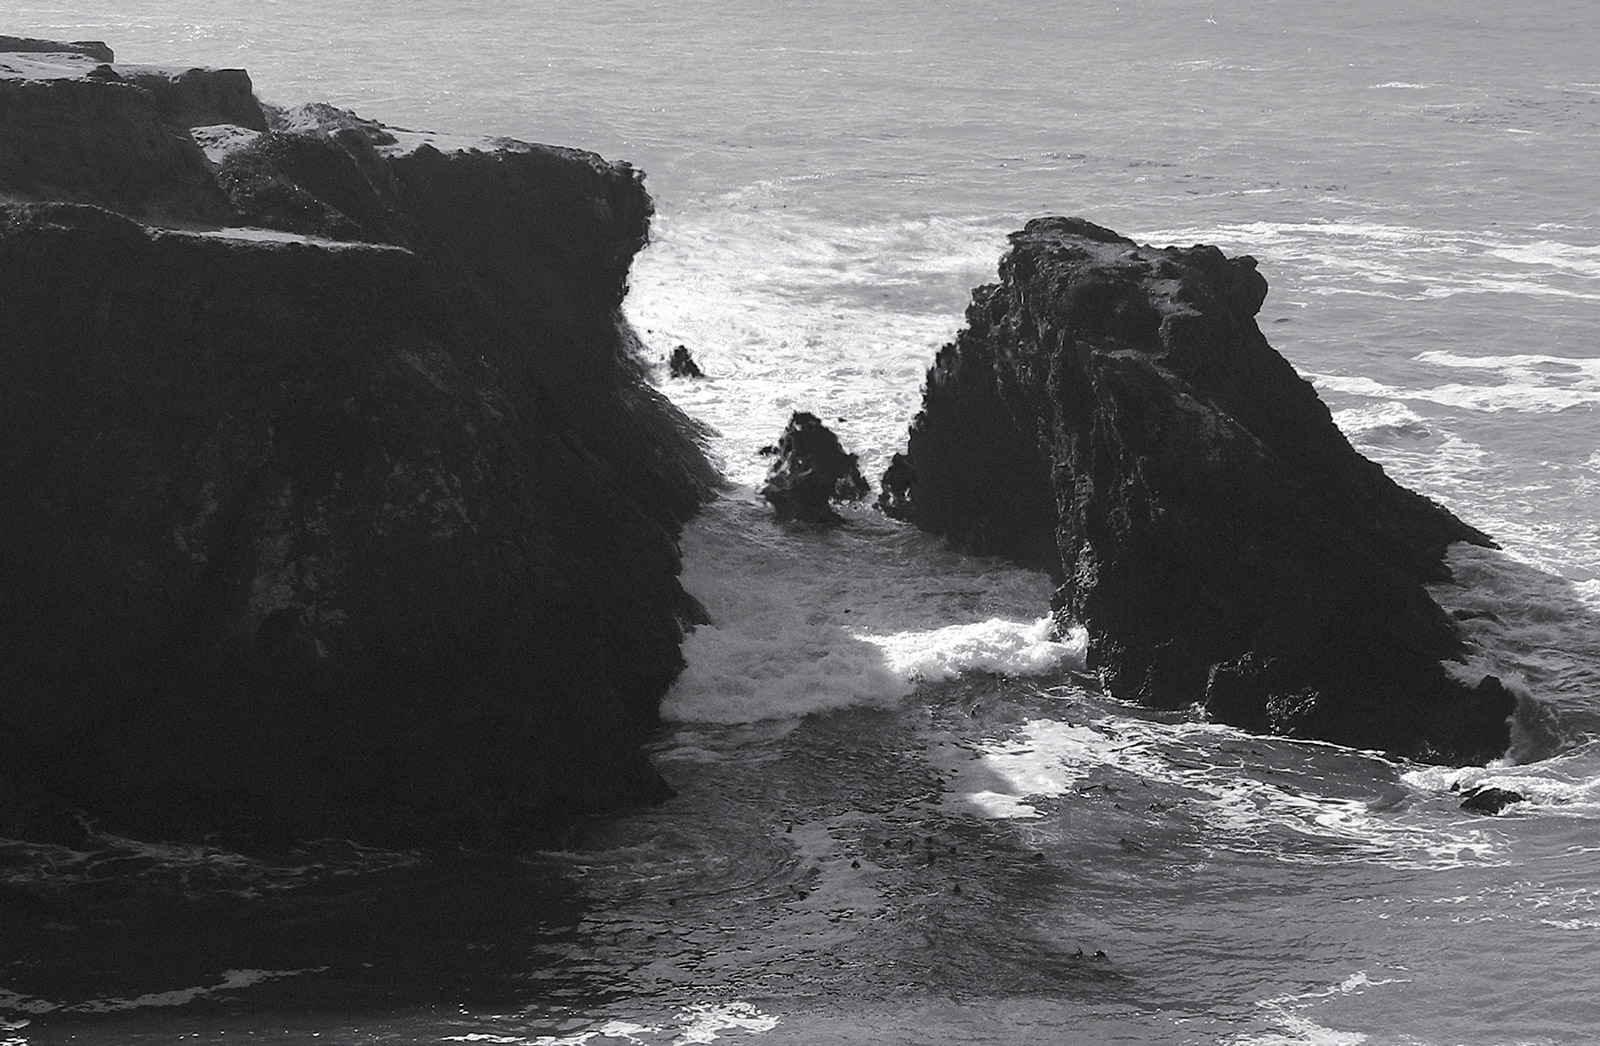 A photograph taken at Cabrillo's Arch after its collapse. 